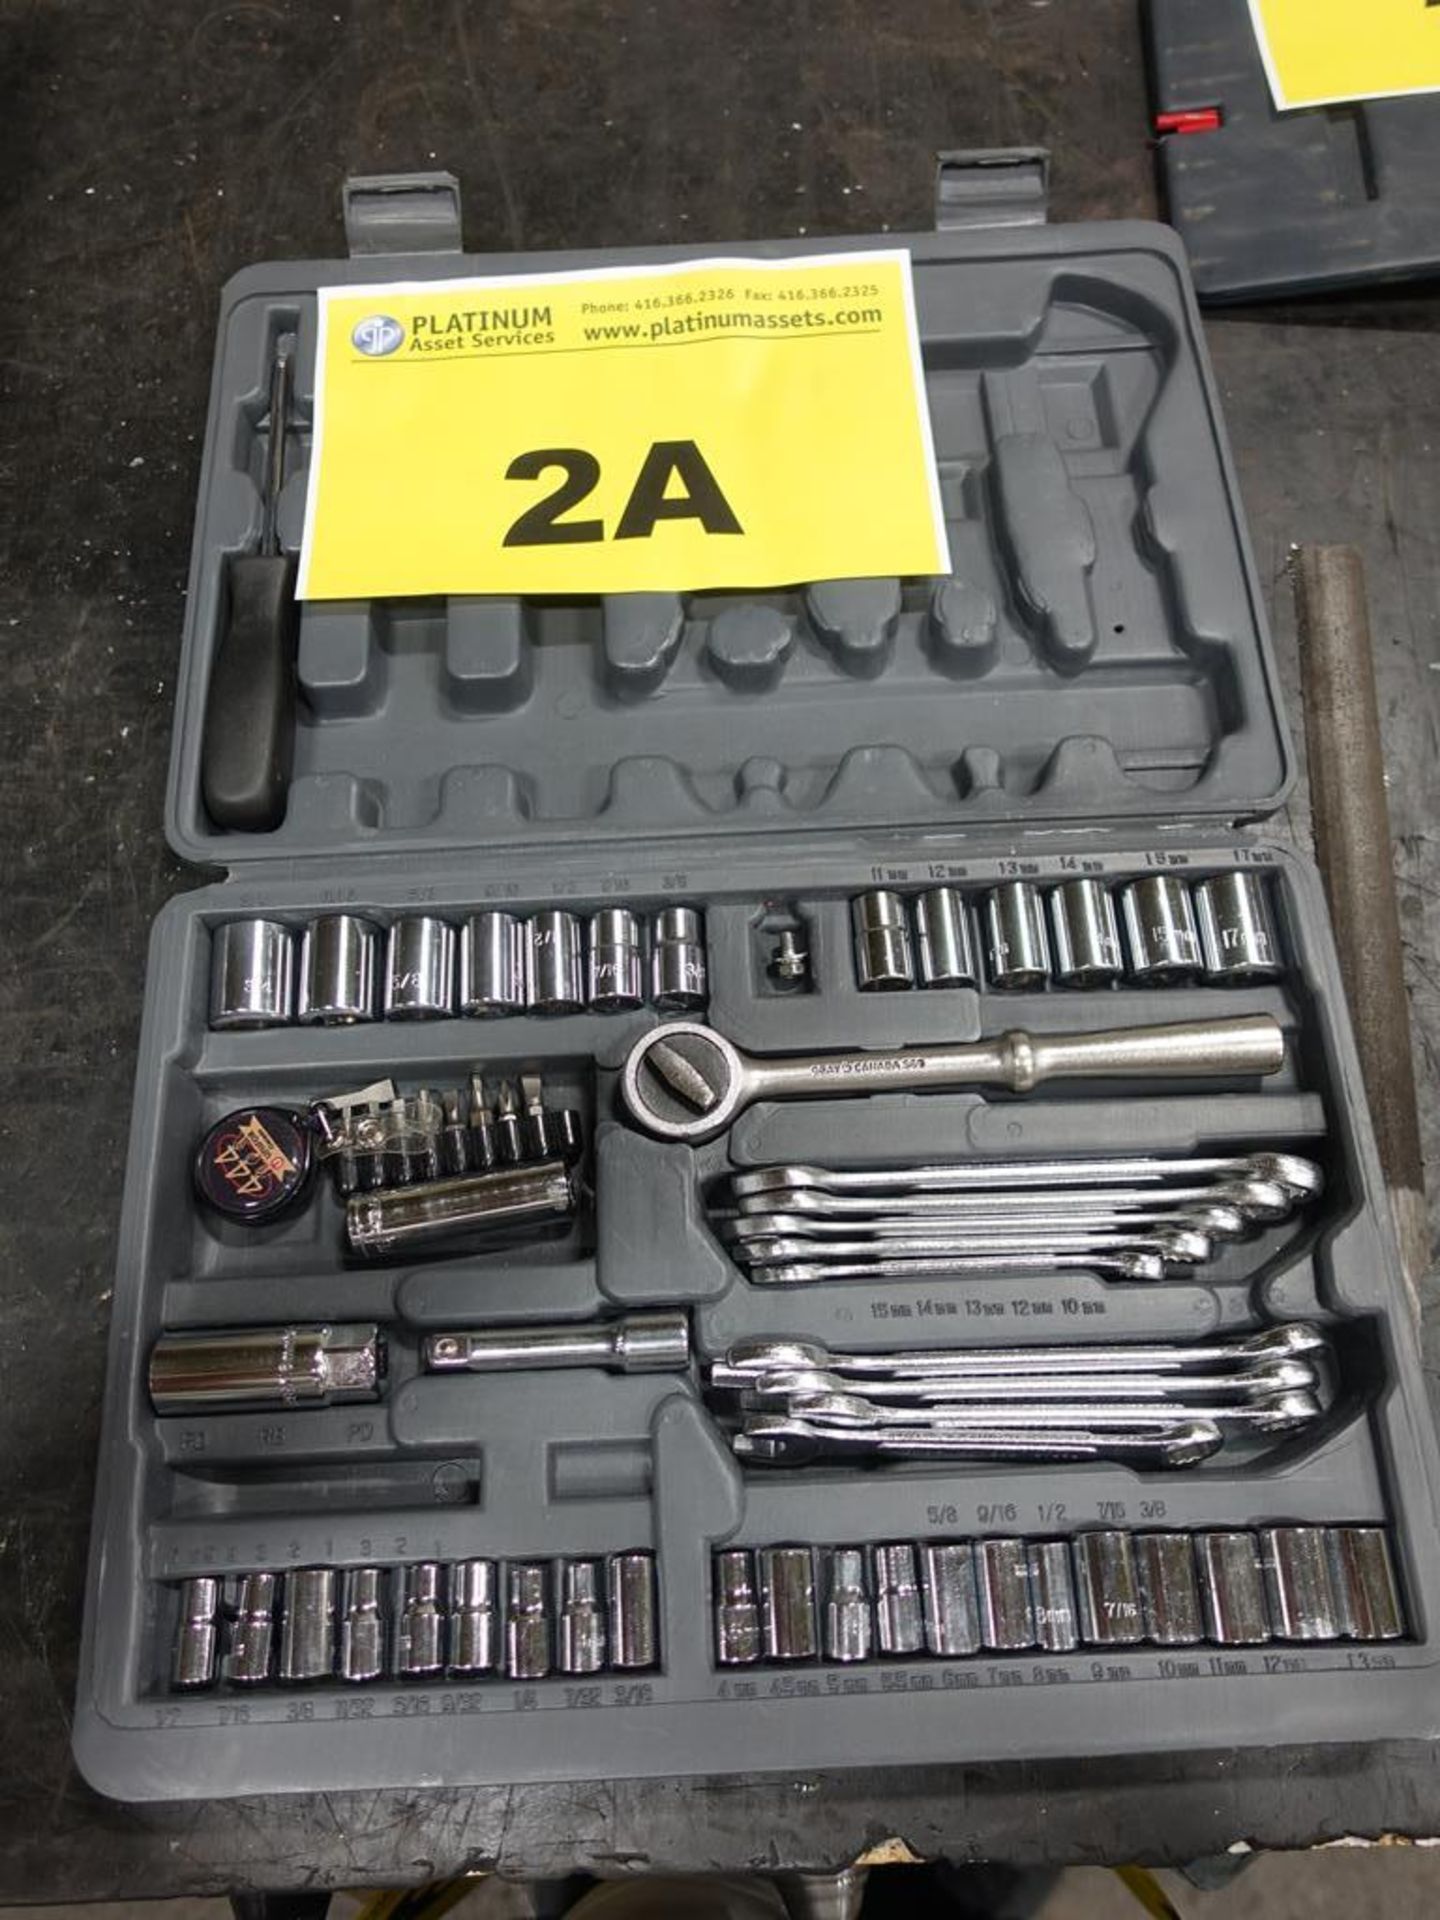 LOT OF RATCHET AND WRENCH SETS